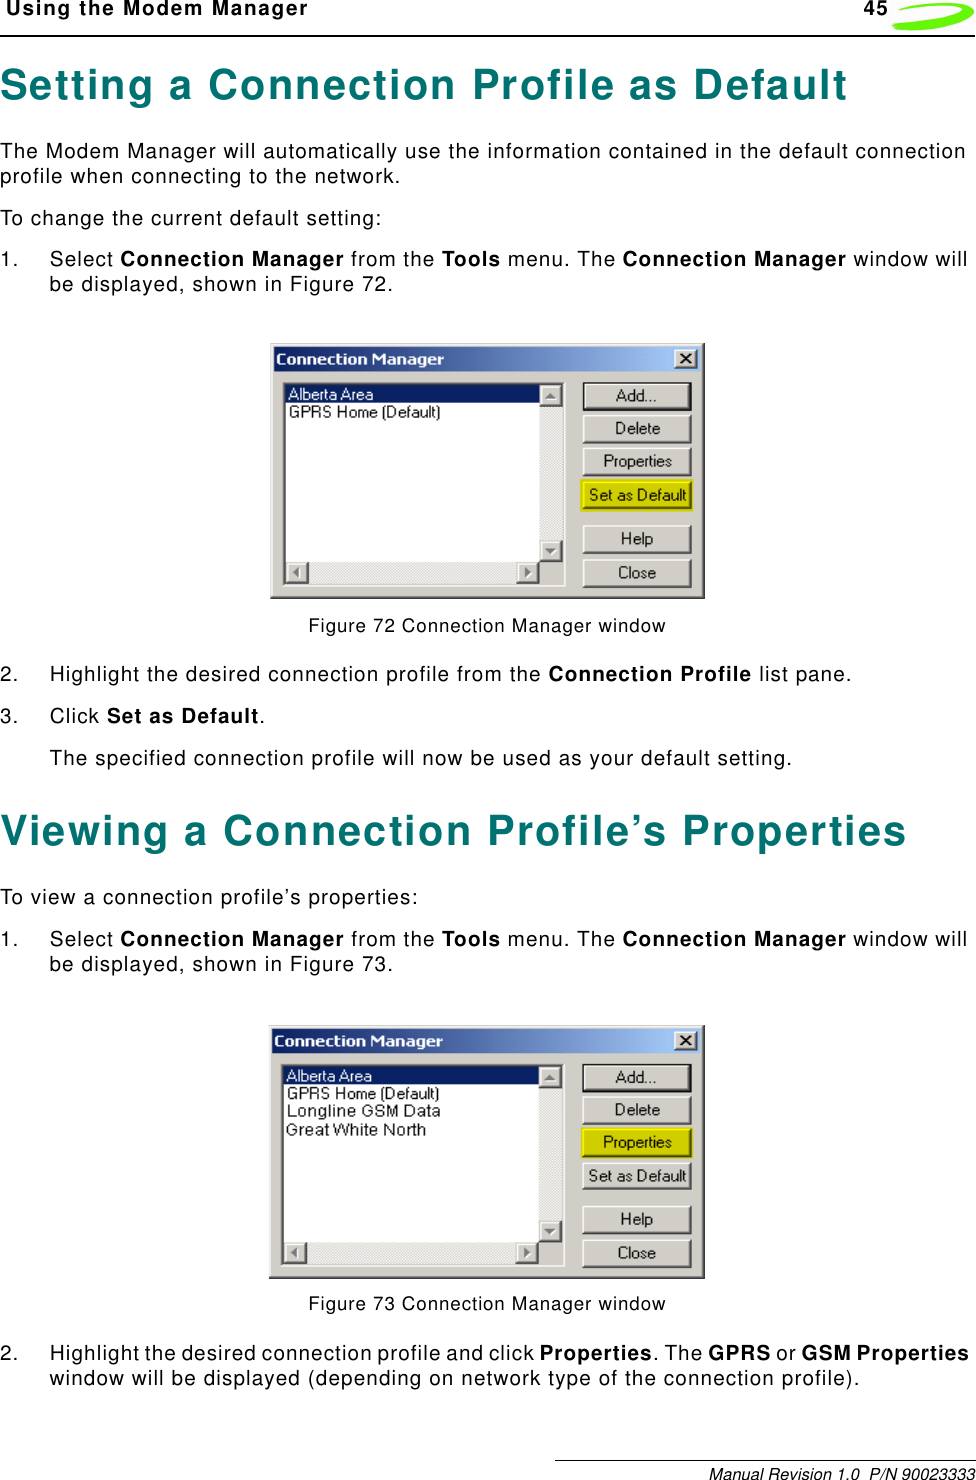  Using the Modem Manager 45Manual Revision 1.0  P/N 90023333Setting a Connection Profile as DefaultThe Modem Manager will automatically use the information contained in the default connection profile when connecting to the network. To change the current default setting:1. Select Connection Manager from the Tools menu. The Connection Manager window will be displayed, shown in Figure 72.Figure 72 Connection Manager window2. Highlight the desired connection profile from the Connection Profile list pane.3. Click Set as Default.The specified connection profile will now be used as your default setting.Viewing a Connection Profile’s PropertiesTo view a connection profile’s properties:1. Select Connection Manager from the Tools menu. The Connection Manager window will be displayed, shown in Figure 73.Figure 73 Connection Manager window2. Highlight the desired connection profile and click Properties. The GPRS or GSM Properties window will be displayed (depending on network type of the connection profile).